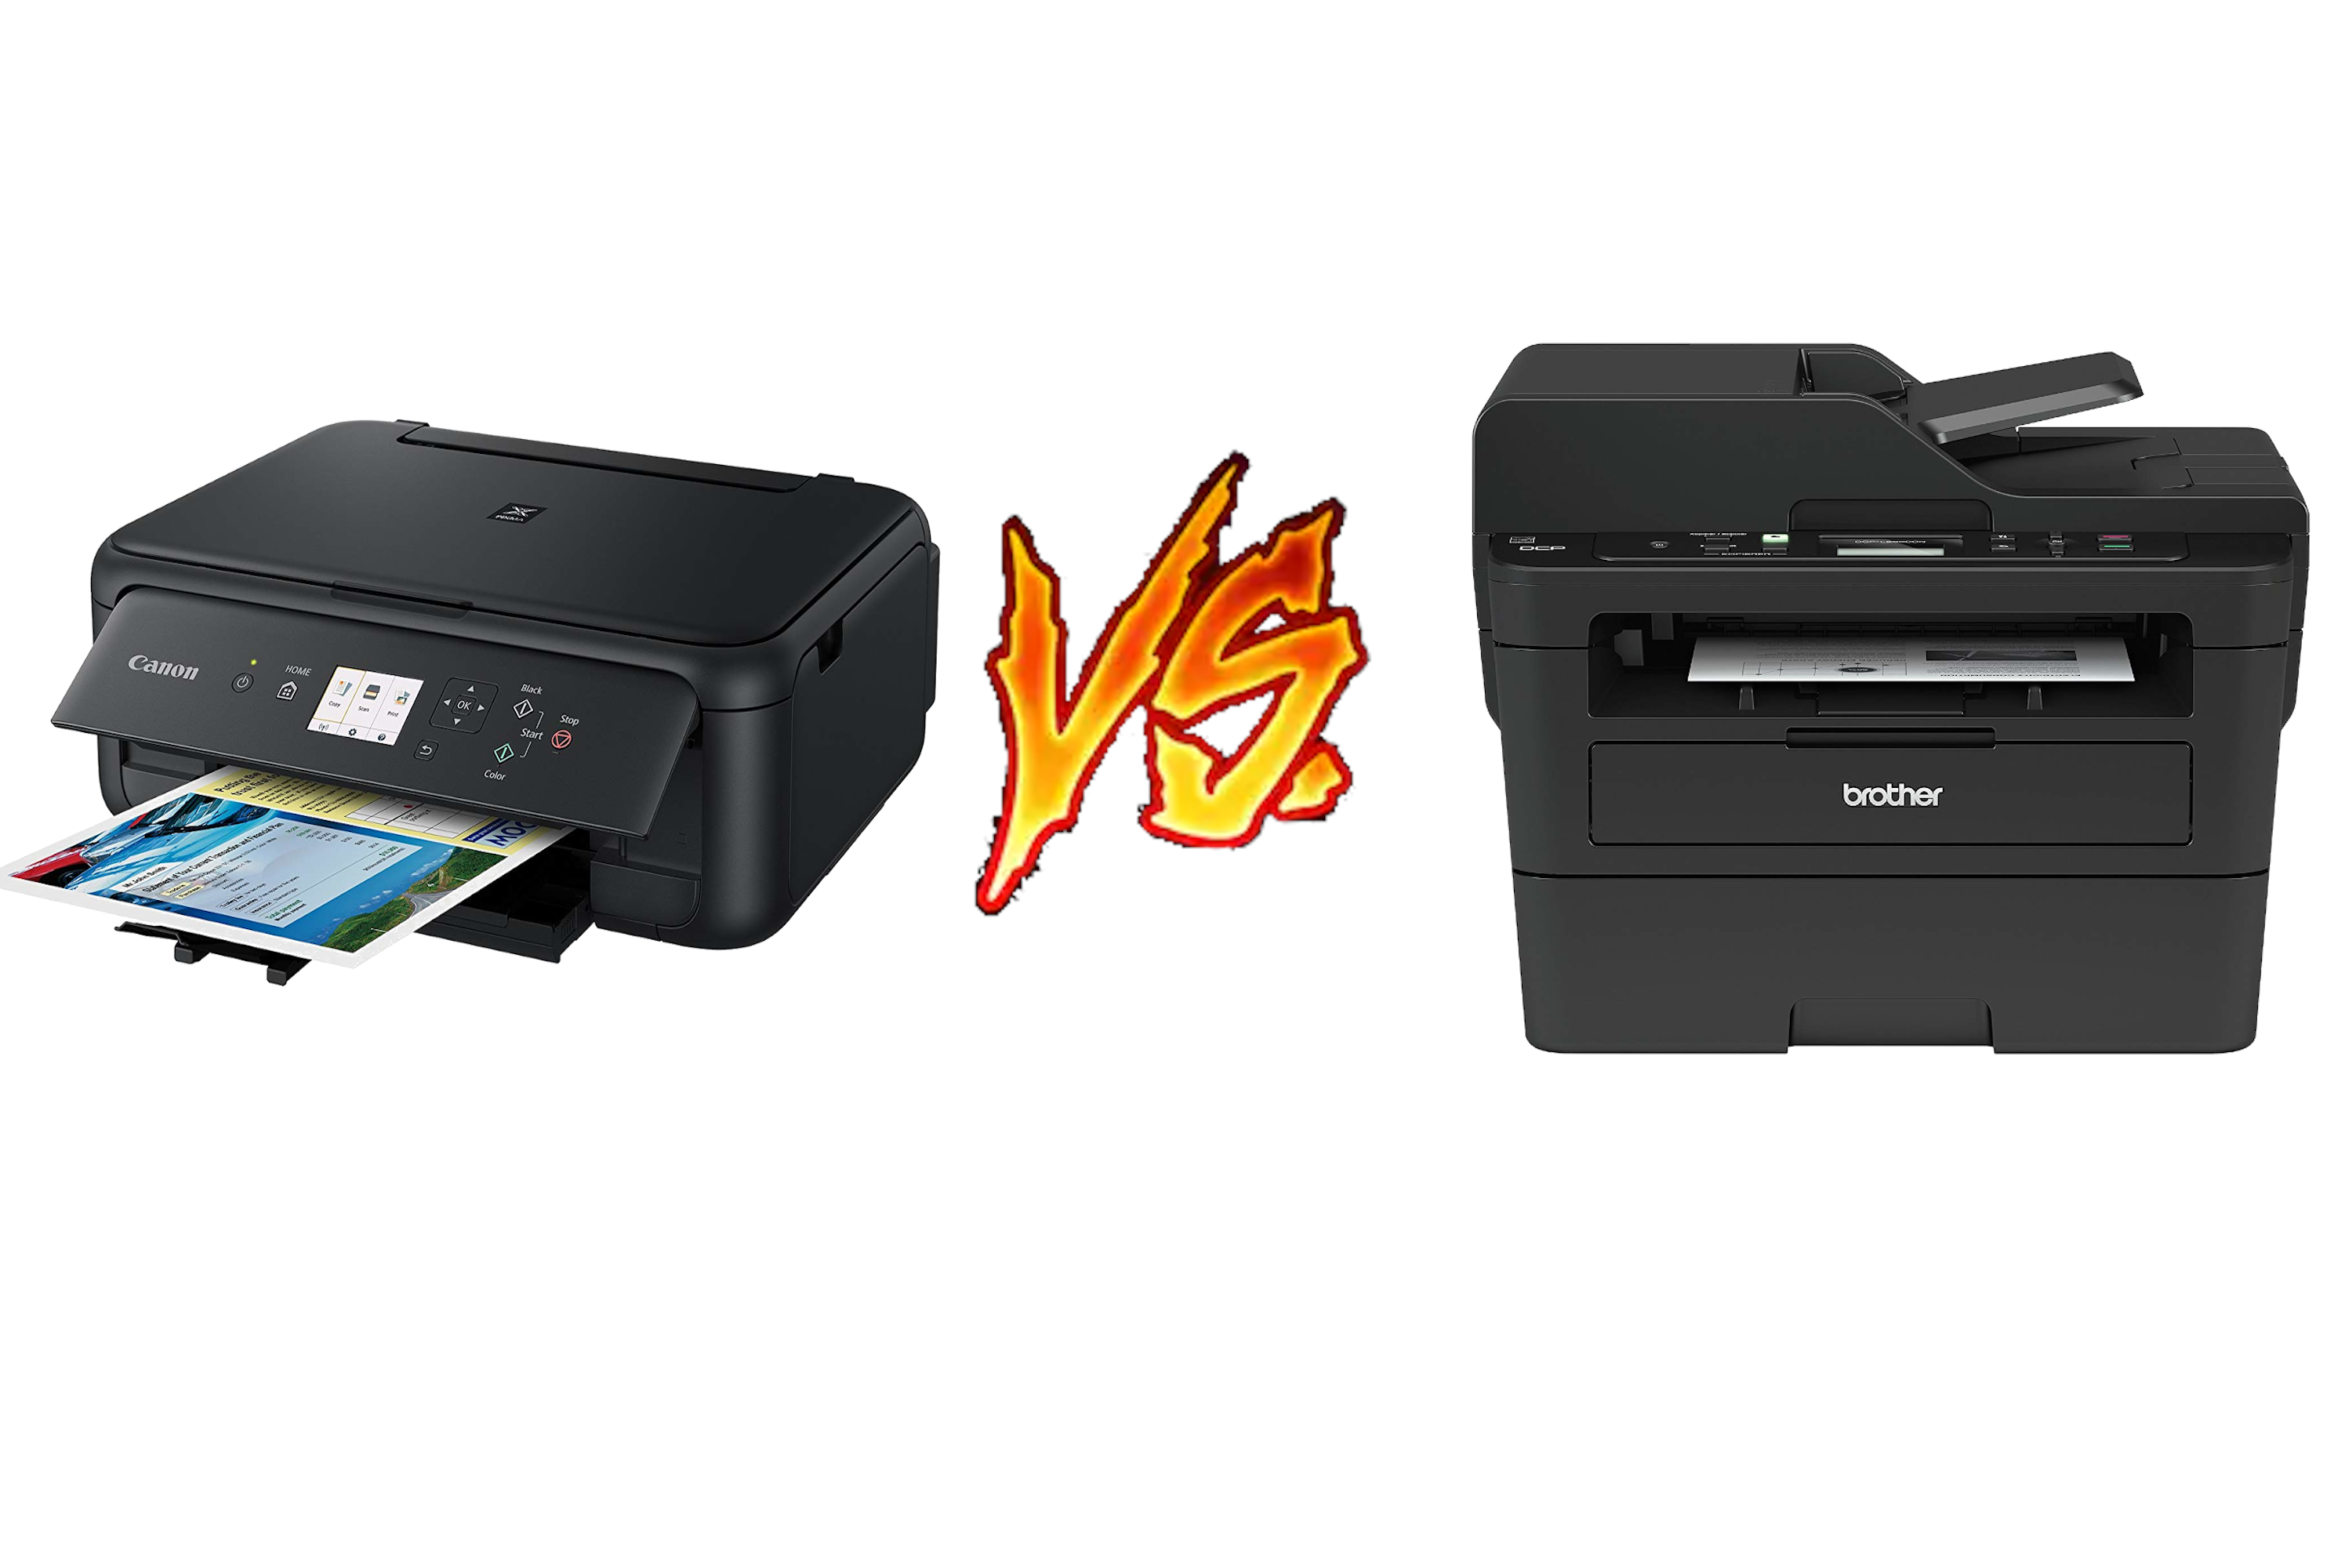 stun udvide Rationel Home office guide: Inkjet vs Laser - which printer do you need? -  NotebookCheck.net News